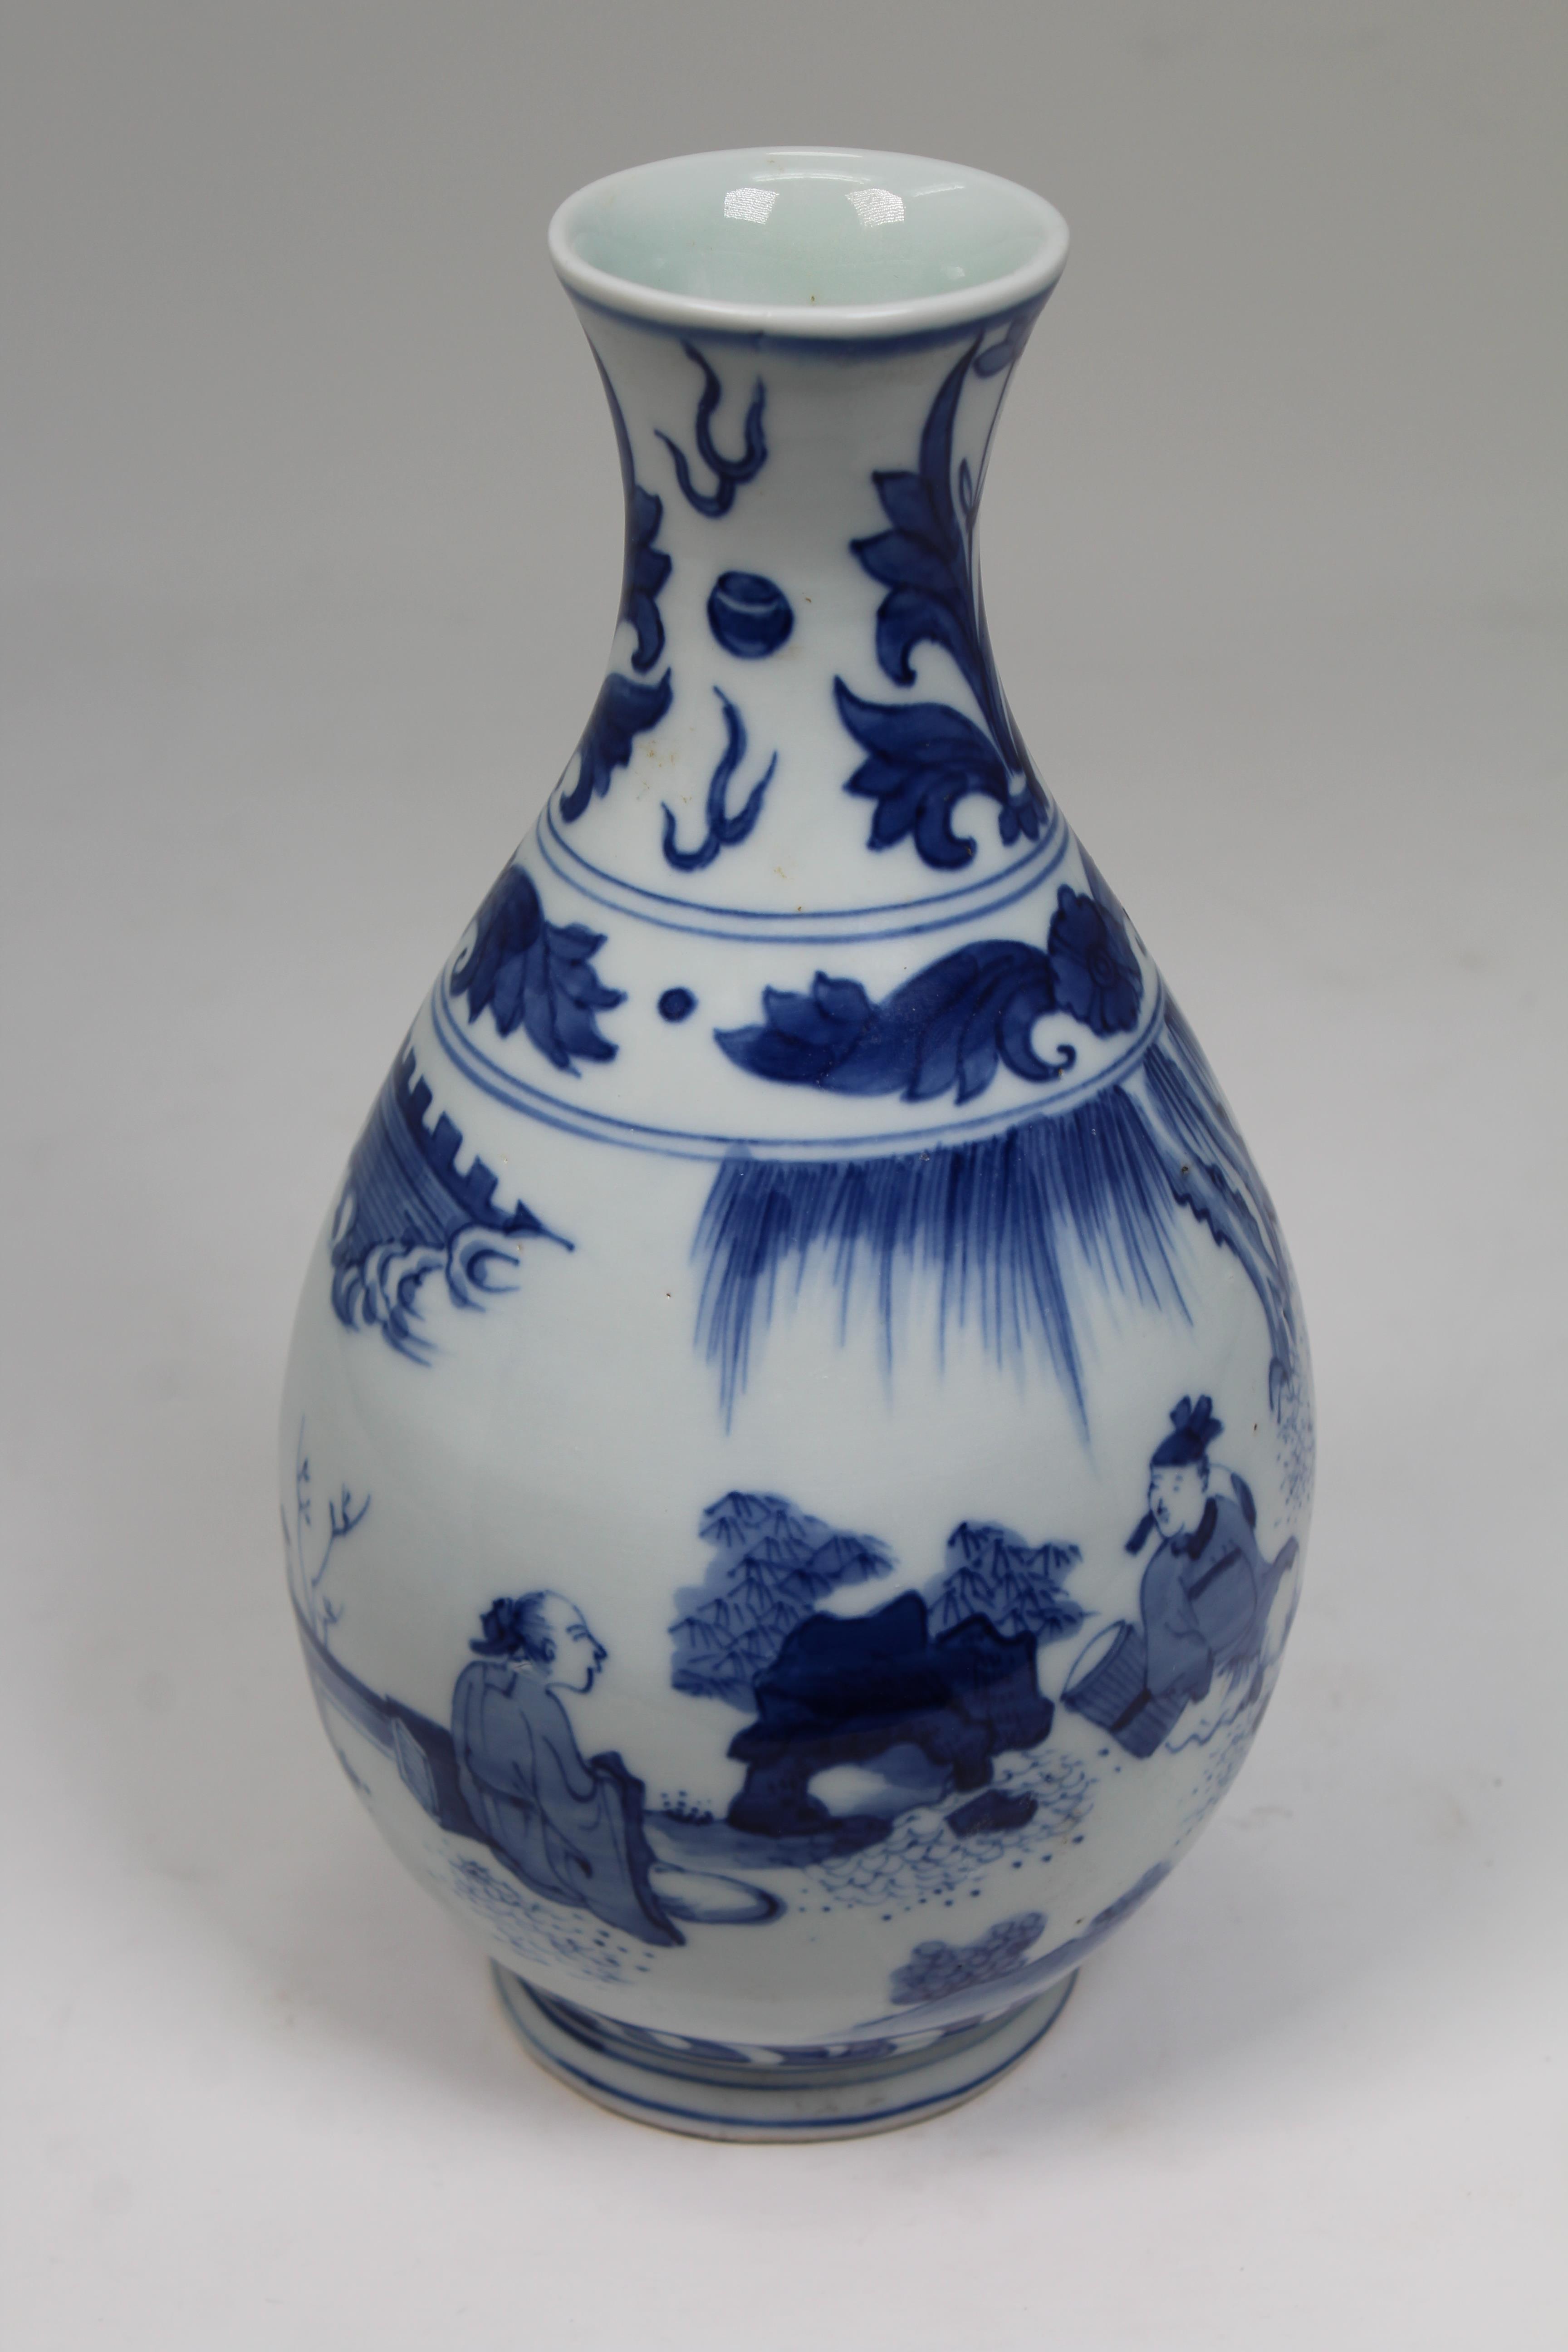 Chinese Blue/White Porcelain Vase. Scene depicts figures conversing. Size: 9 x 4.75 in. - Image 3 of 8